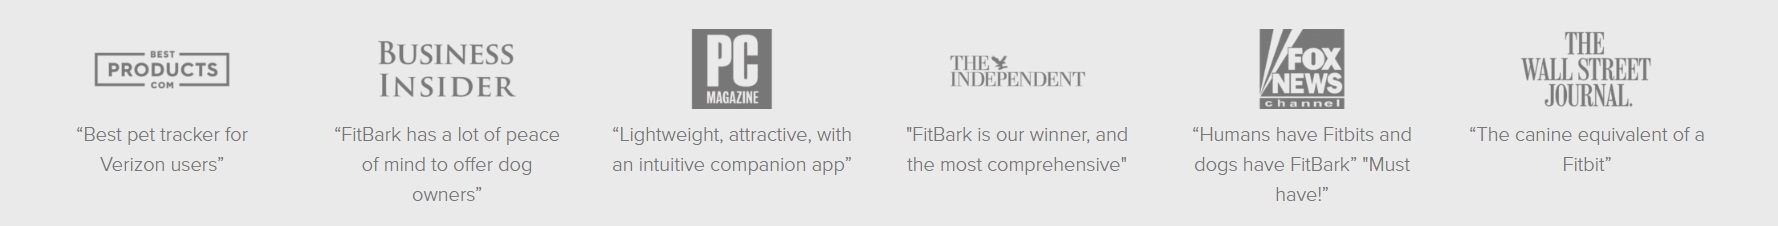 fitbark-featured